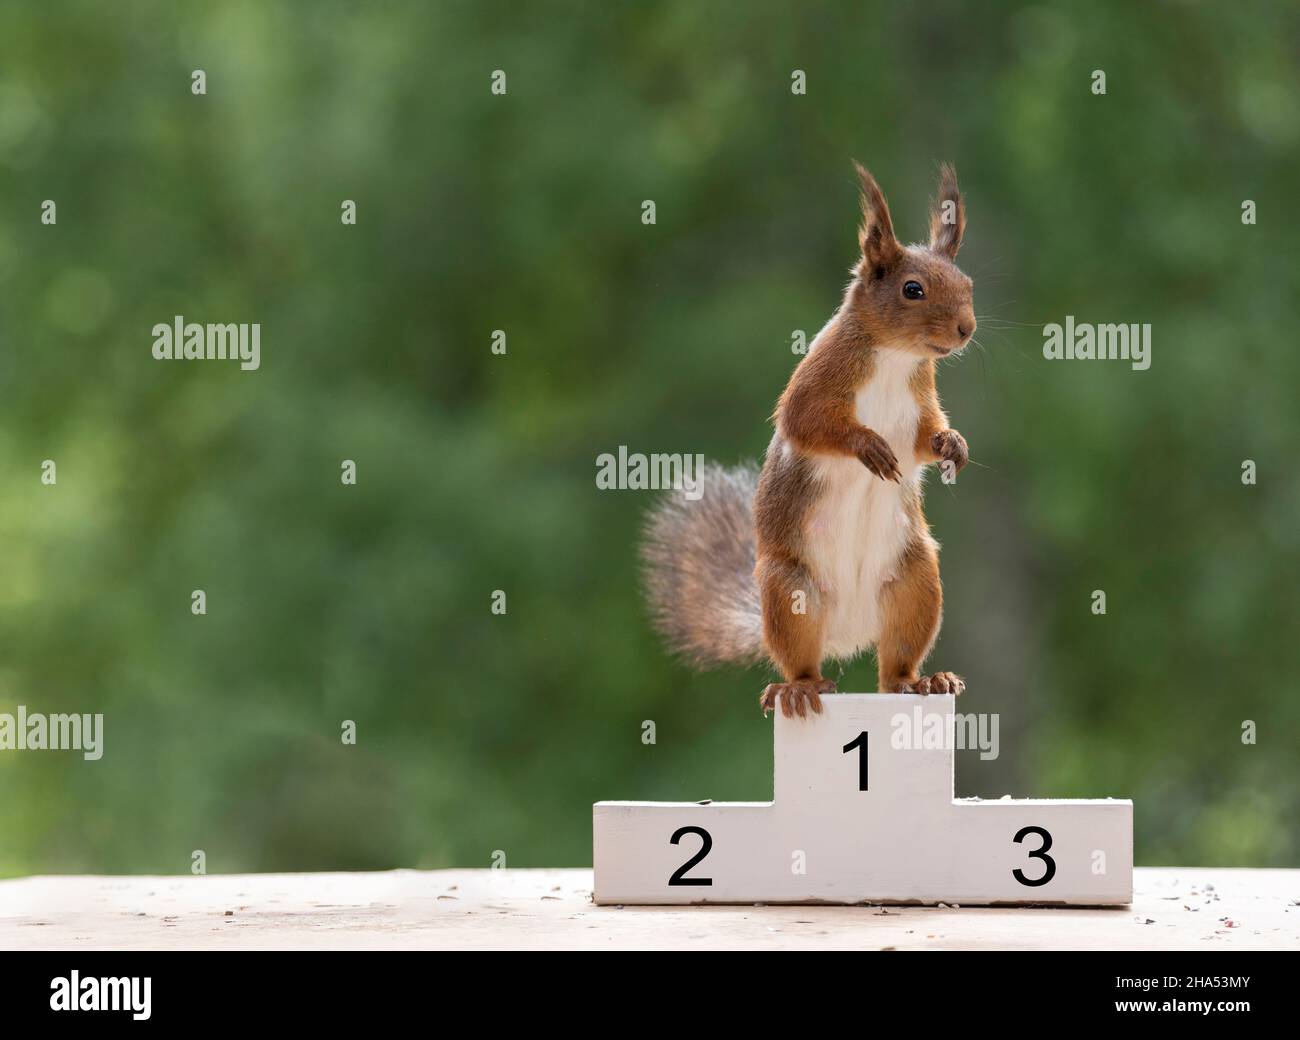 red squirrel is standing on an podium Stock Photo